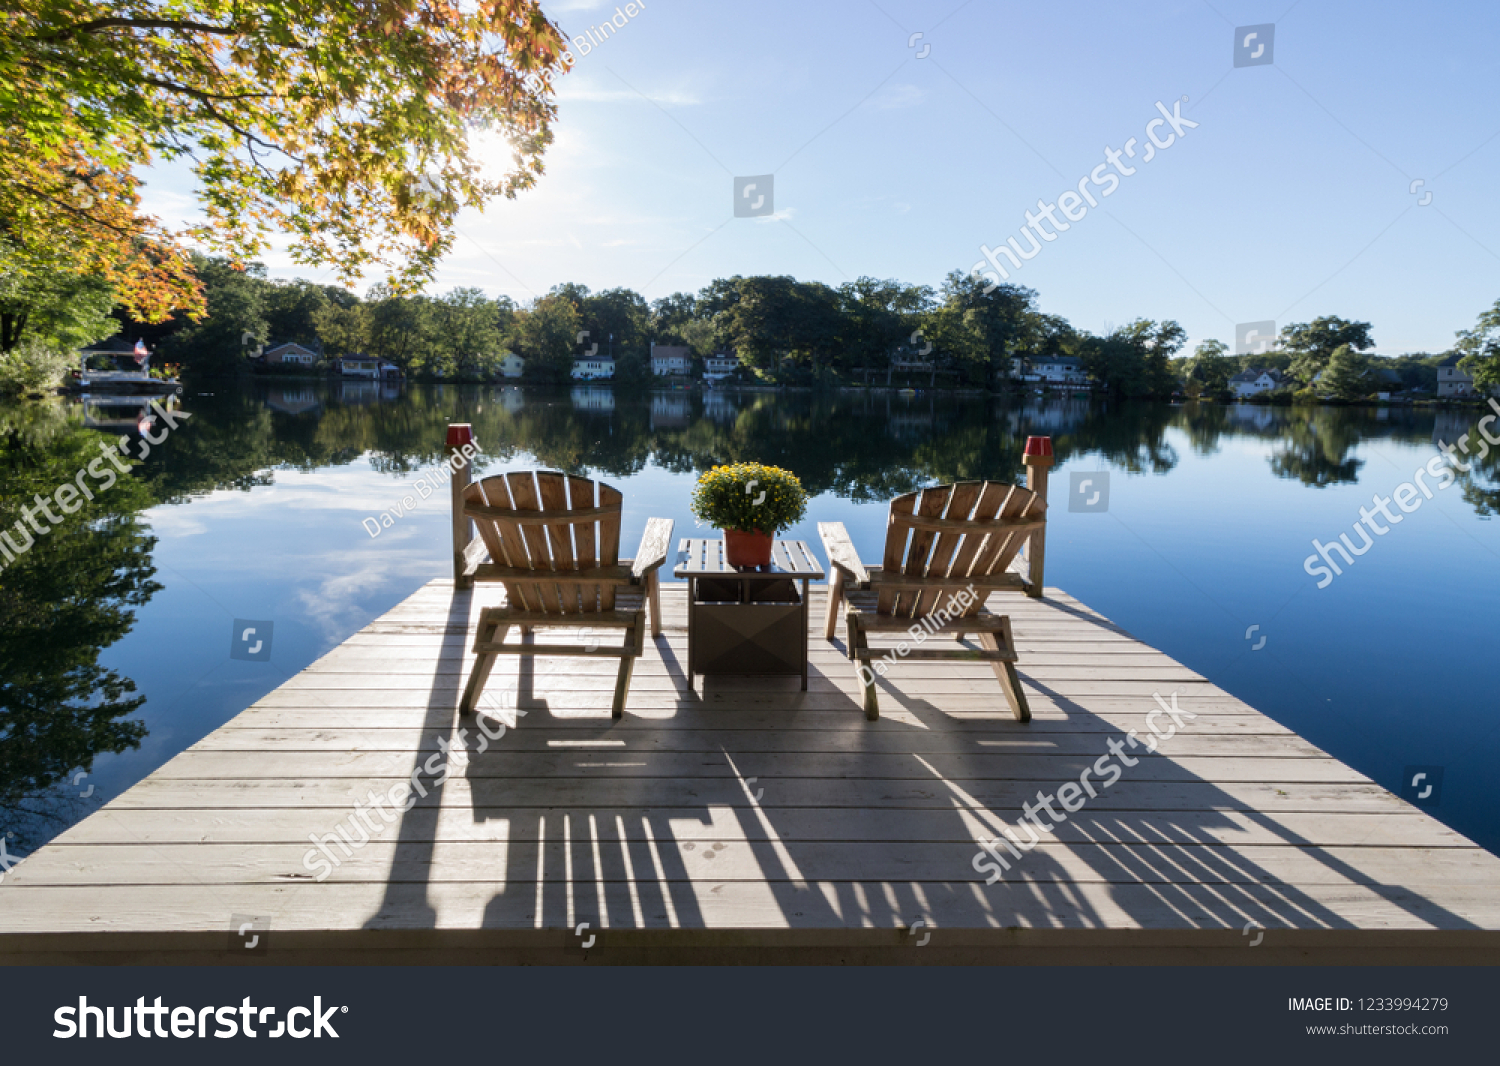 View of chairs and dock on a pristine lake with reflections and shadows #1233994279